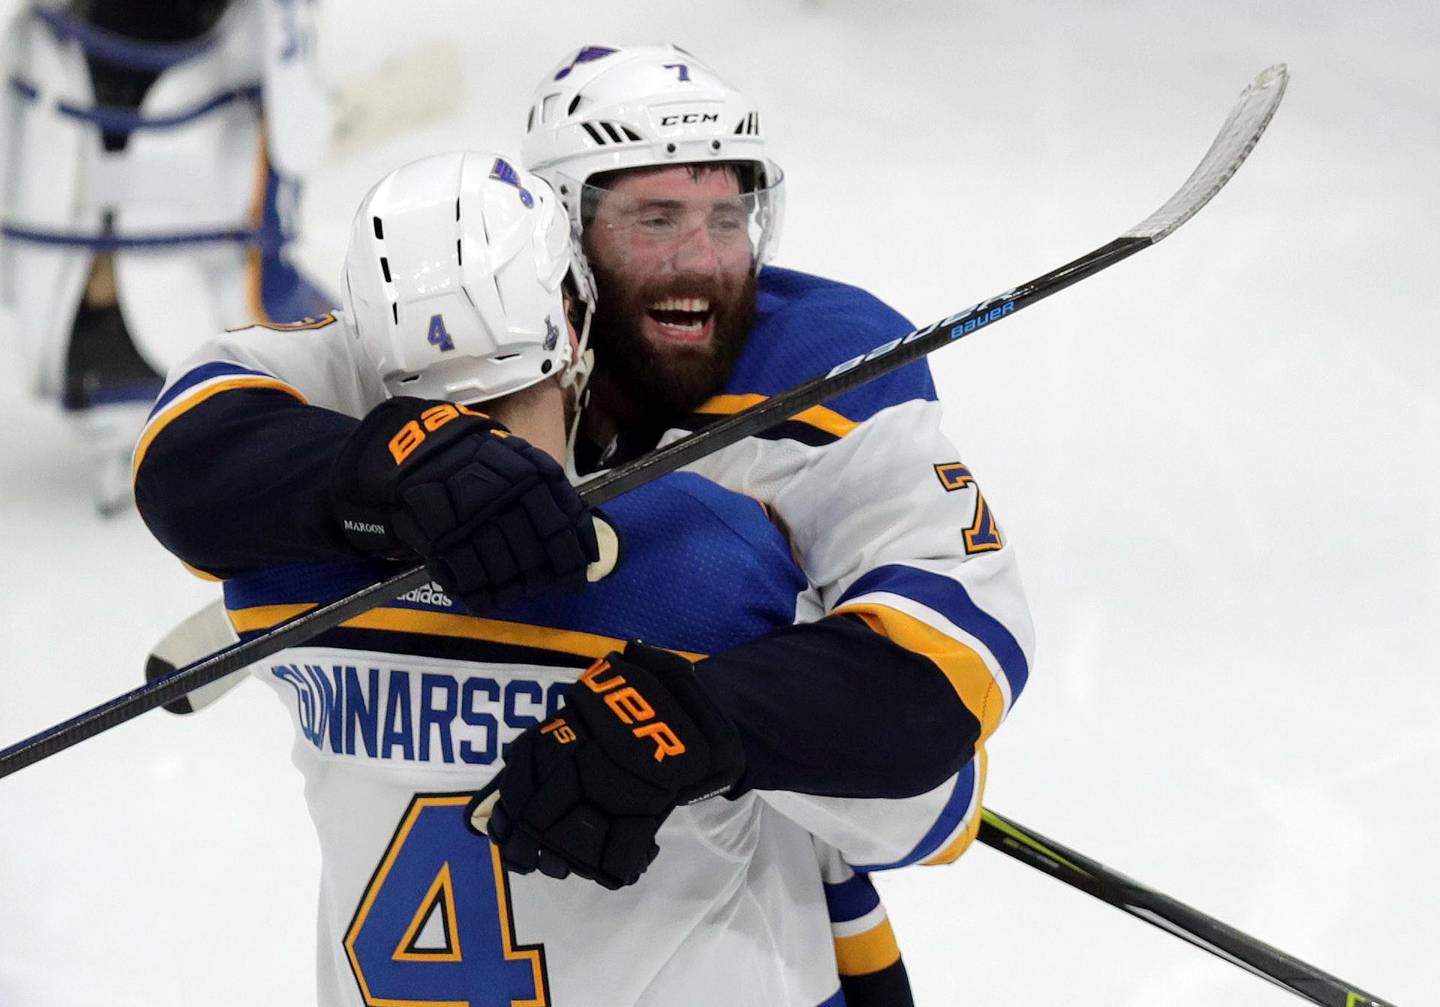 St. Louis Blues' Carl Gunnarsson (4), of Sweden, is congratulated by Pat Maroon, rear, after he scored the winning goal against the Boston Bruins during the first overtime period in Game 2 of the NHL hockey Stanley Cup Final, Wednesday, May 29, 2019, in Boston. (Bruce Bennett/Pool via AP)